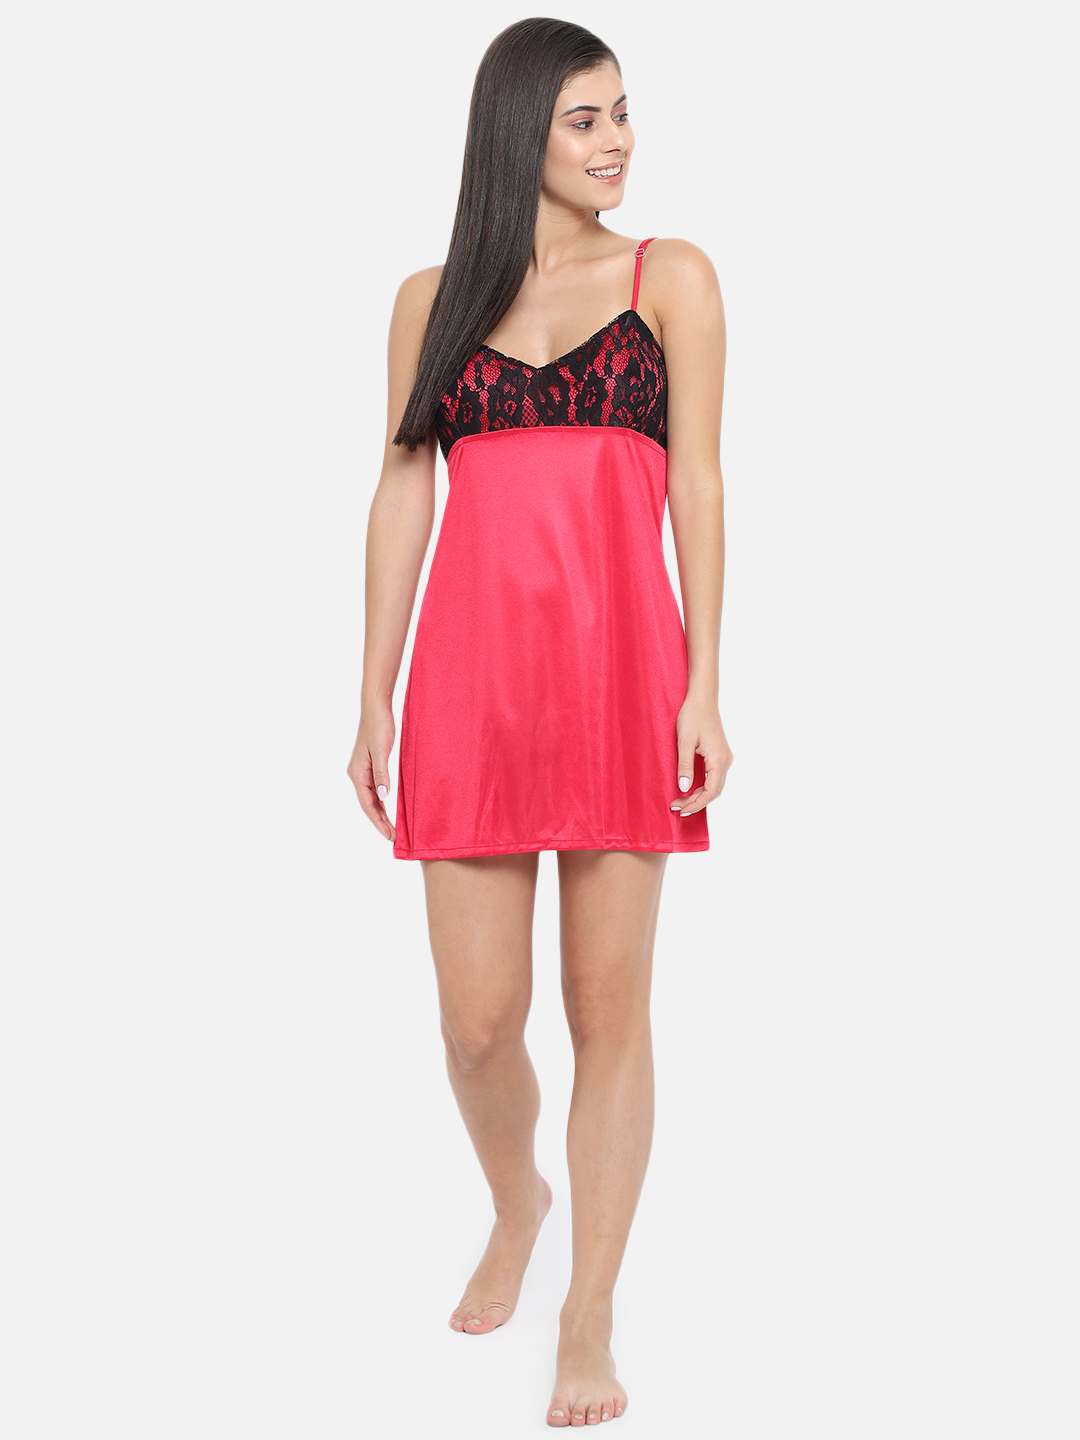 Sexy Night Dress For Women - Buy Sexy Night Dress For Women online at Best  Prices in India | Flipkart.com